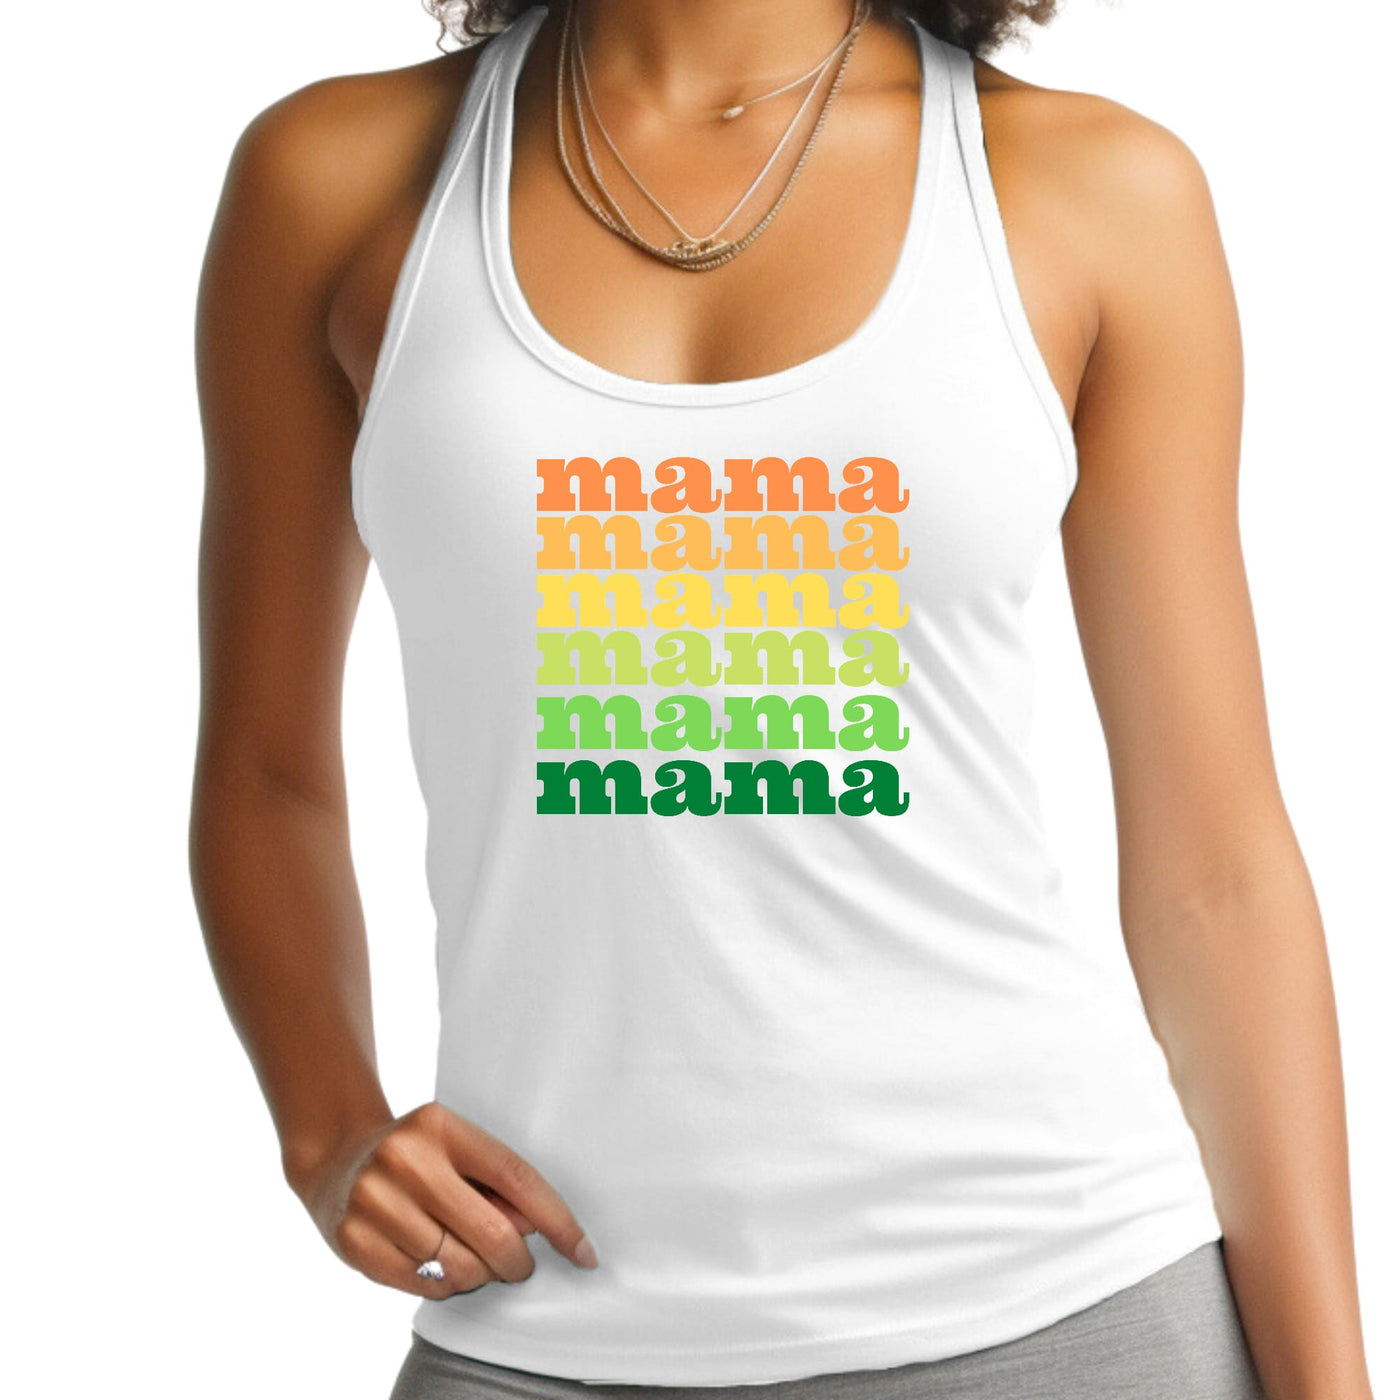 Womens Tank Top Fitness T - shirt Mama Celebrating Mothers - Tops